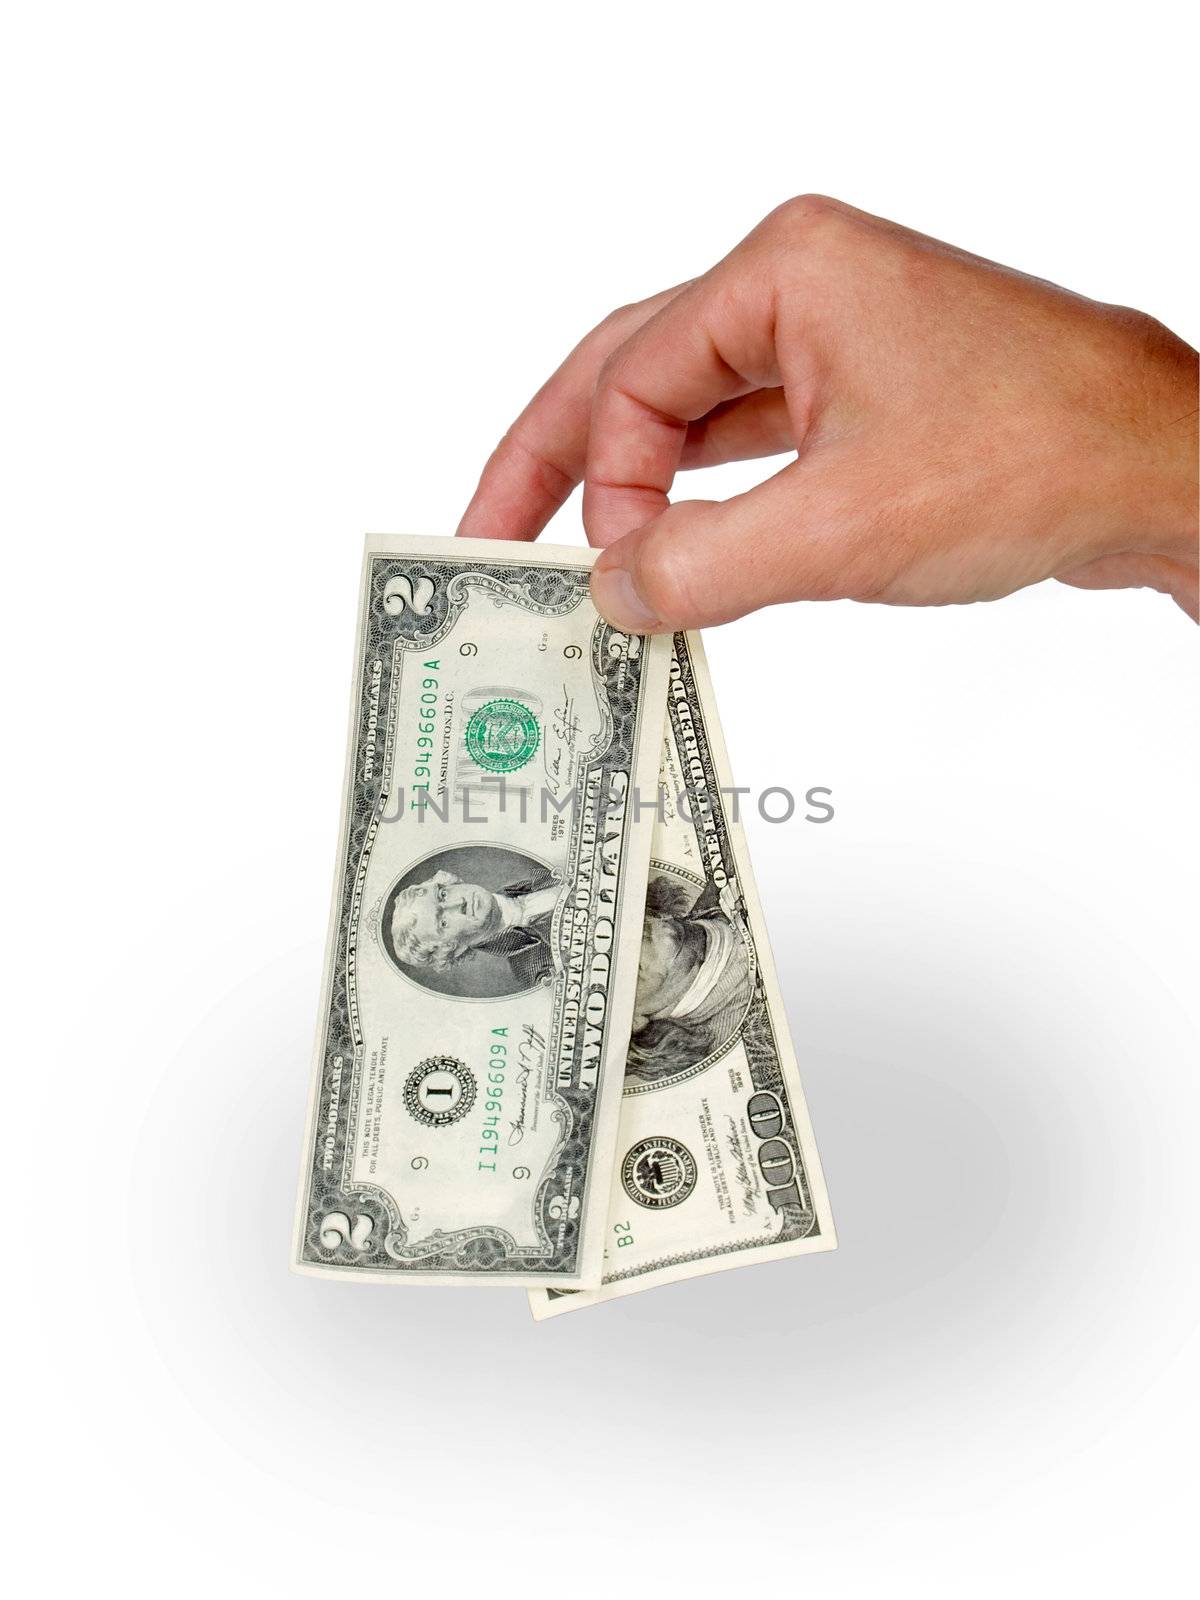 dollars in hand on white background